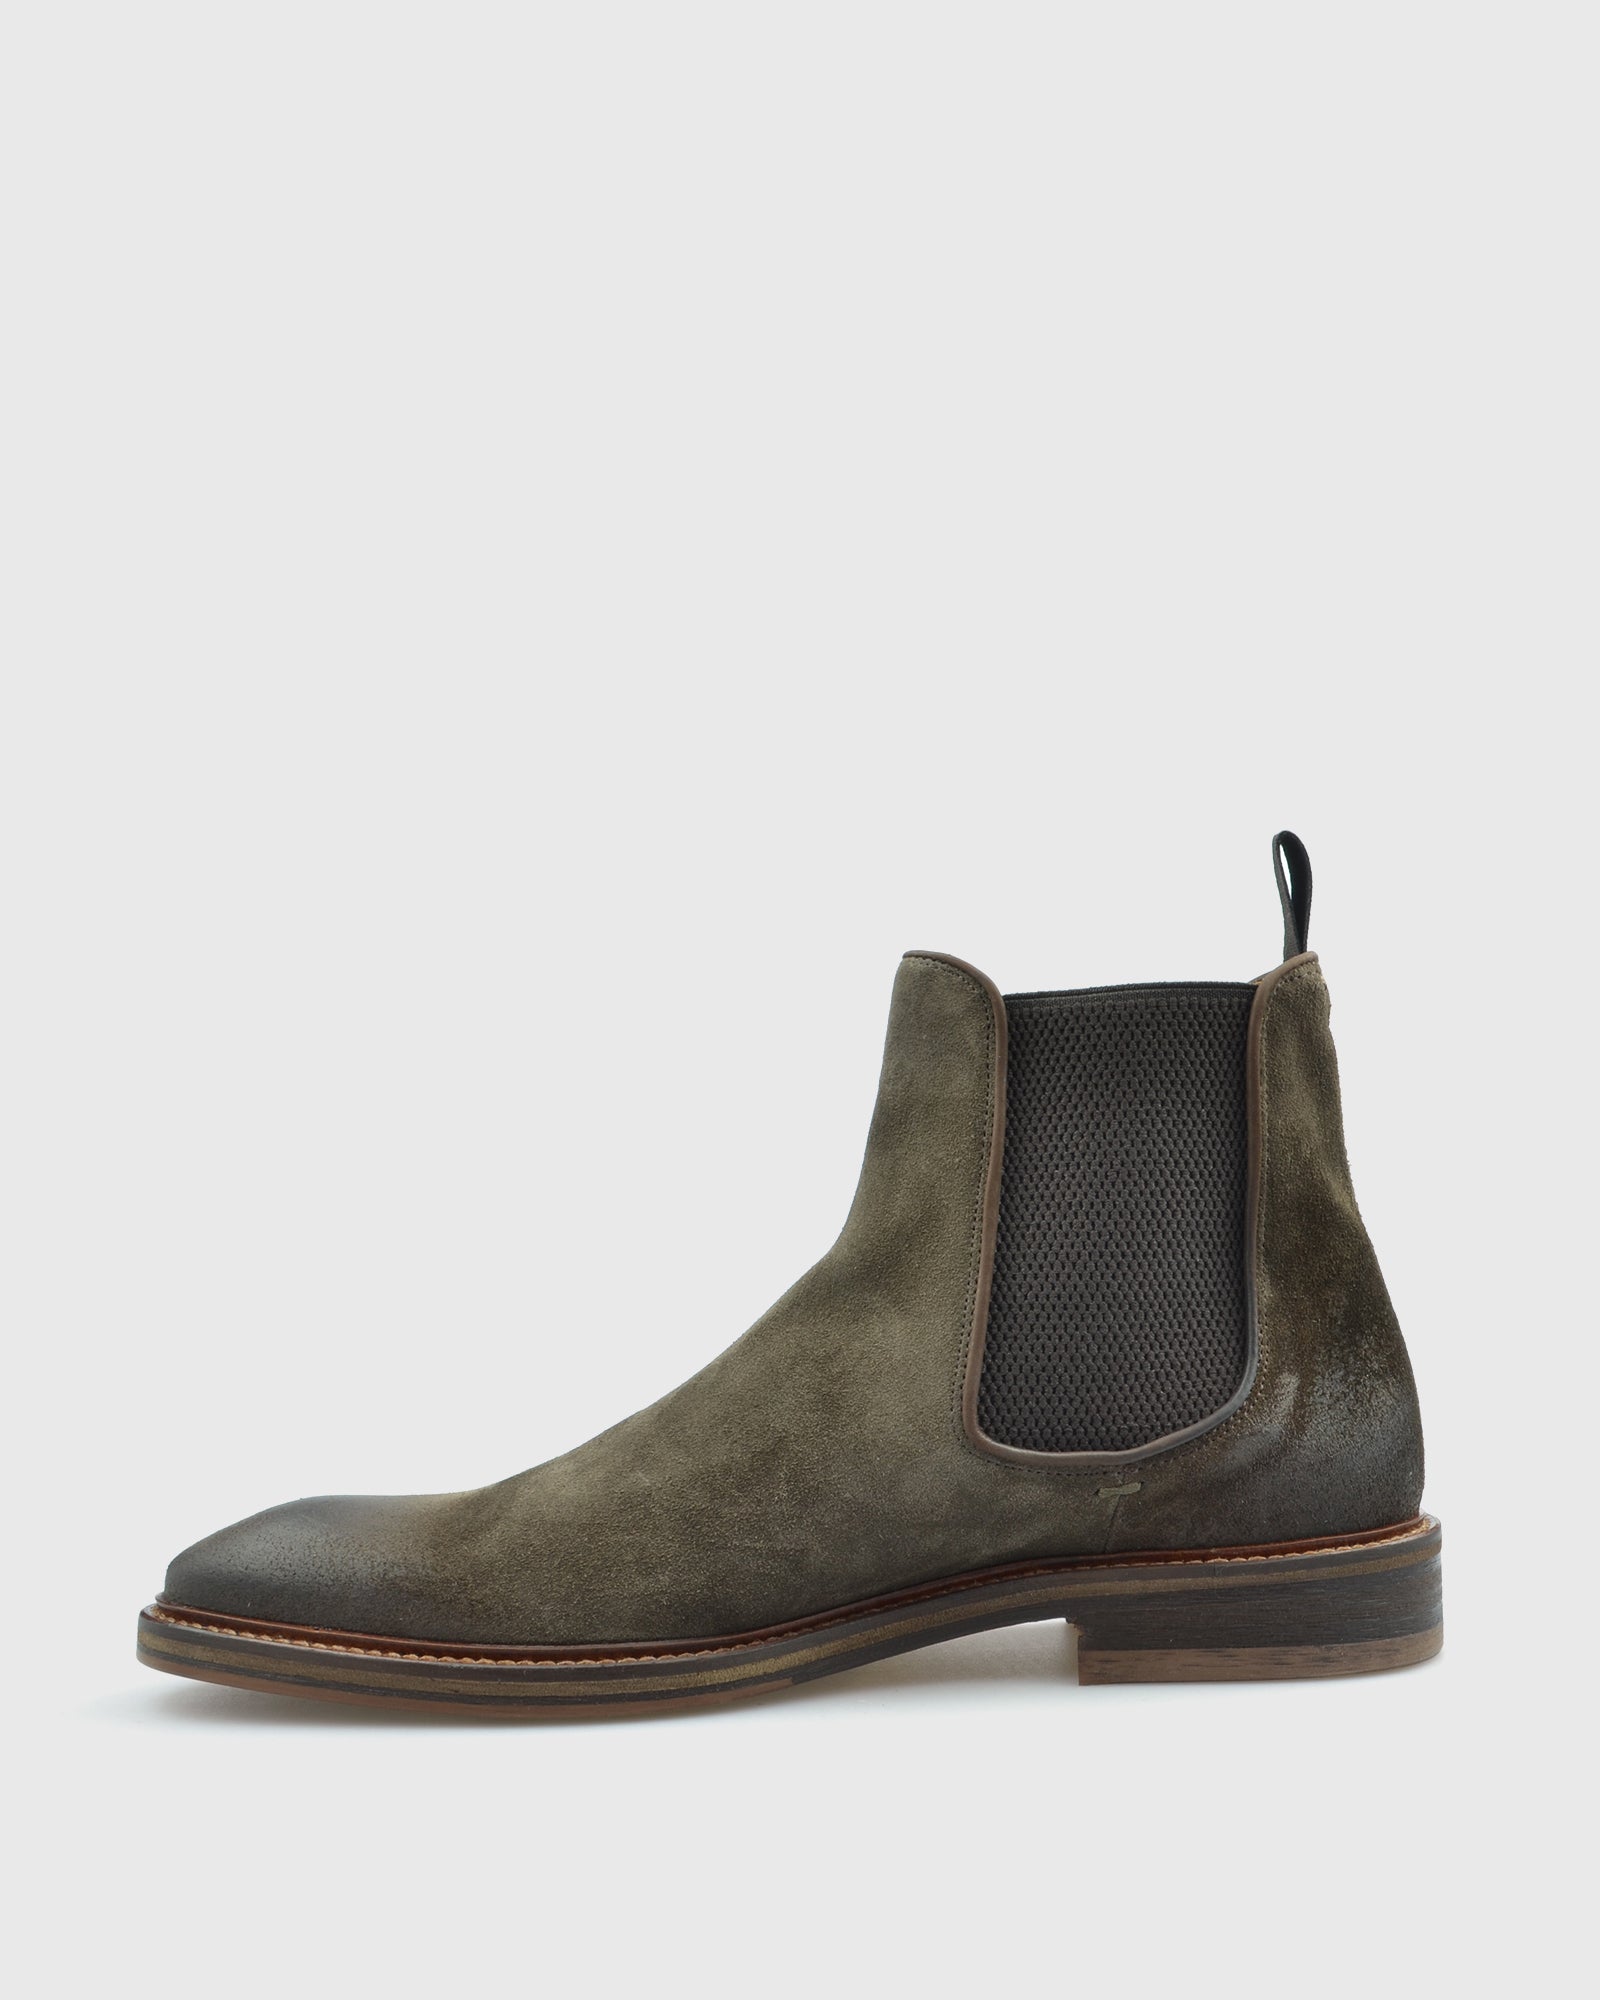 VINCENT & FRANKS VW21VF SUEDE CHLSEA MORO BOOT